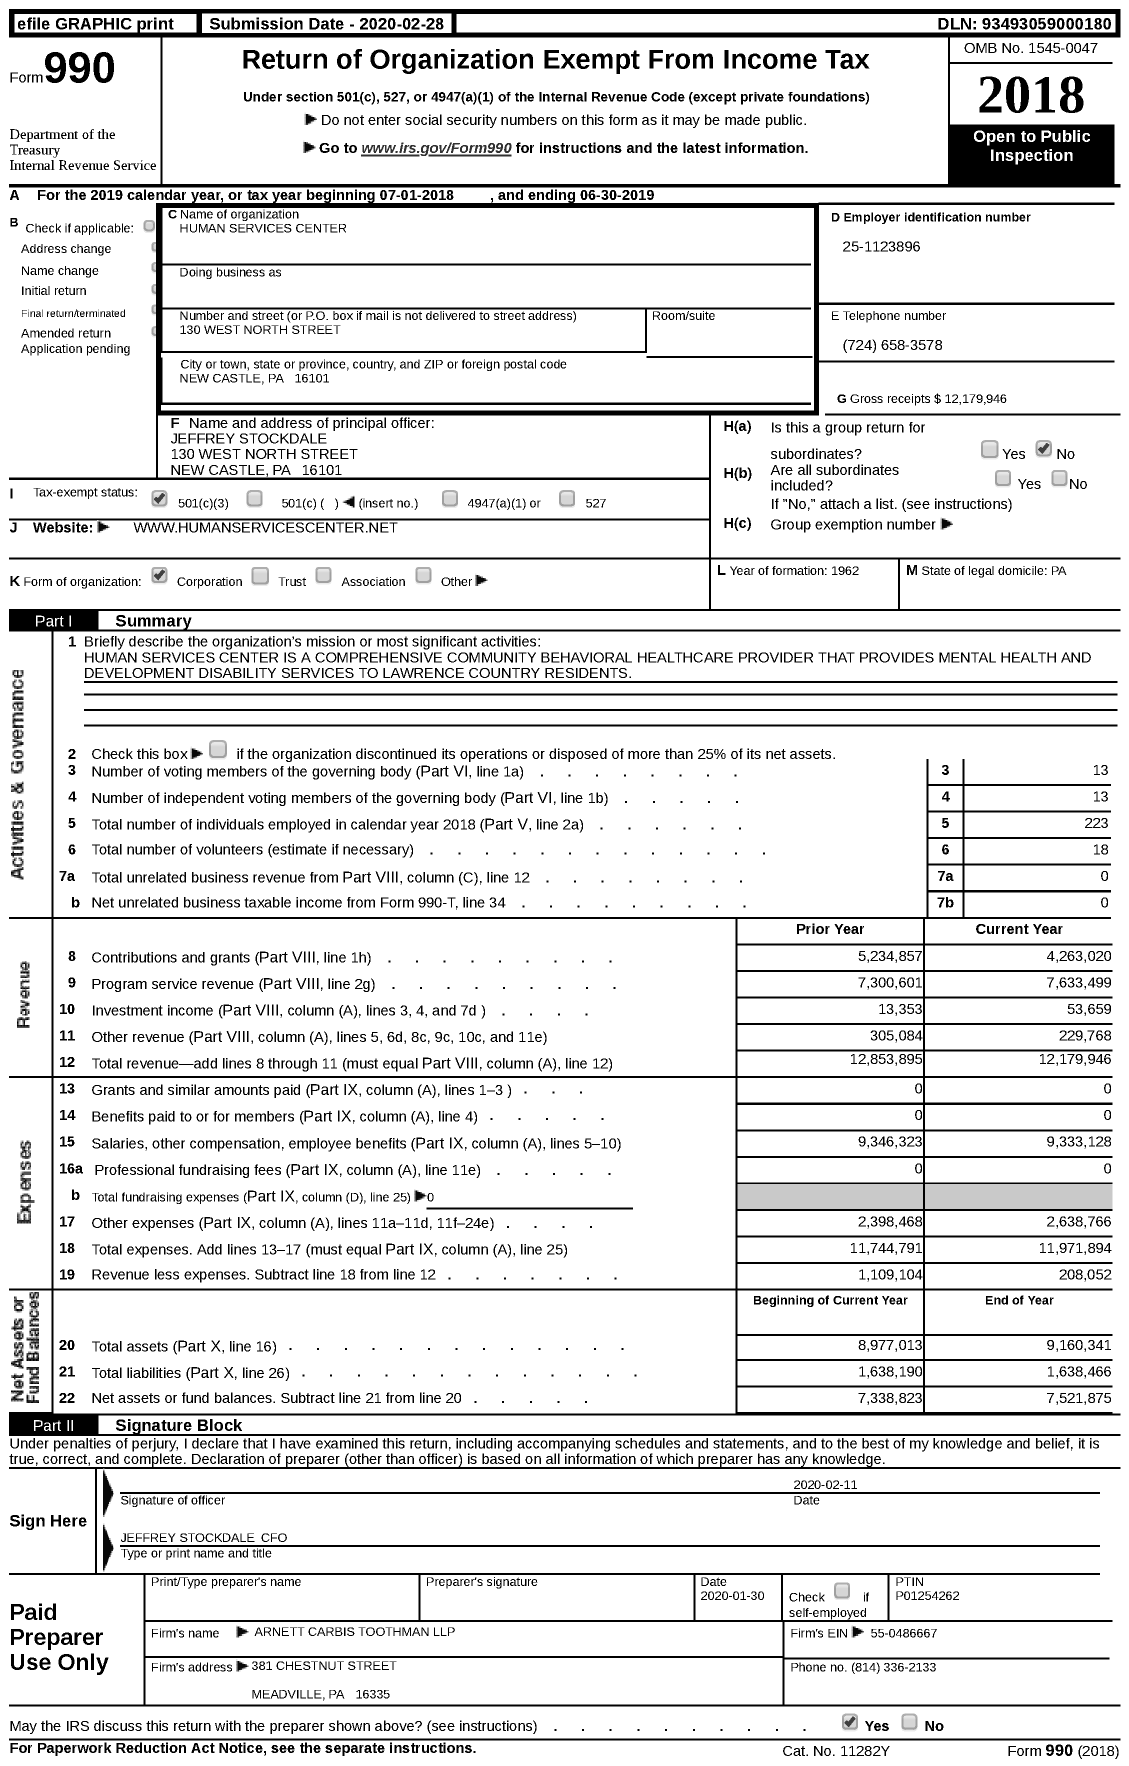 Image of first page of 2018 Form 990 for Human Services Center (HSC)